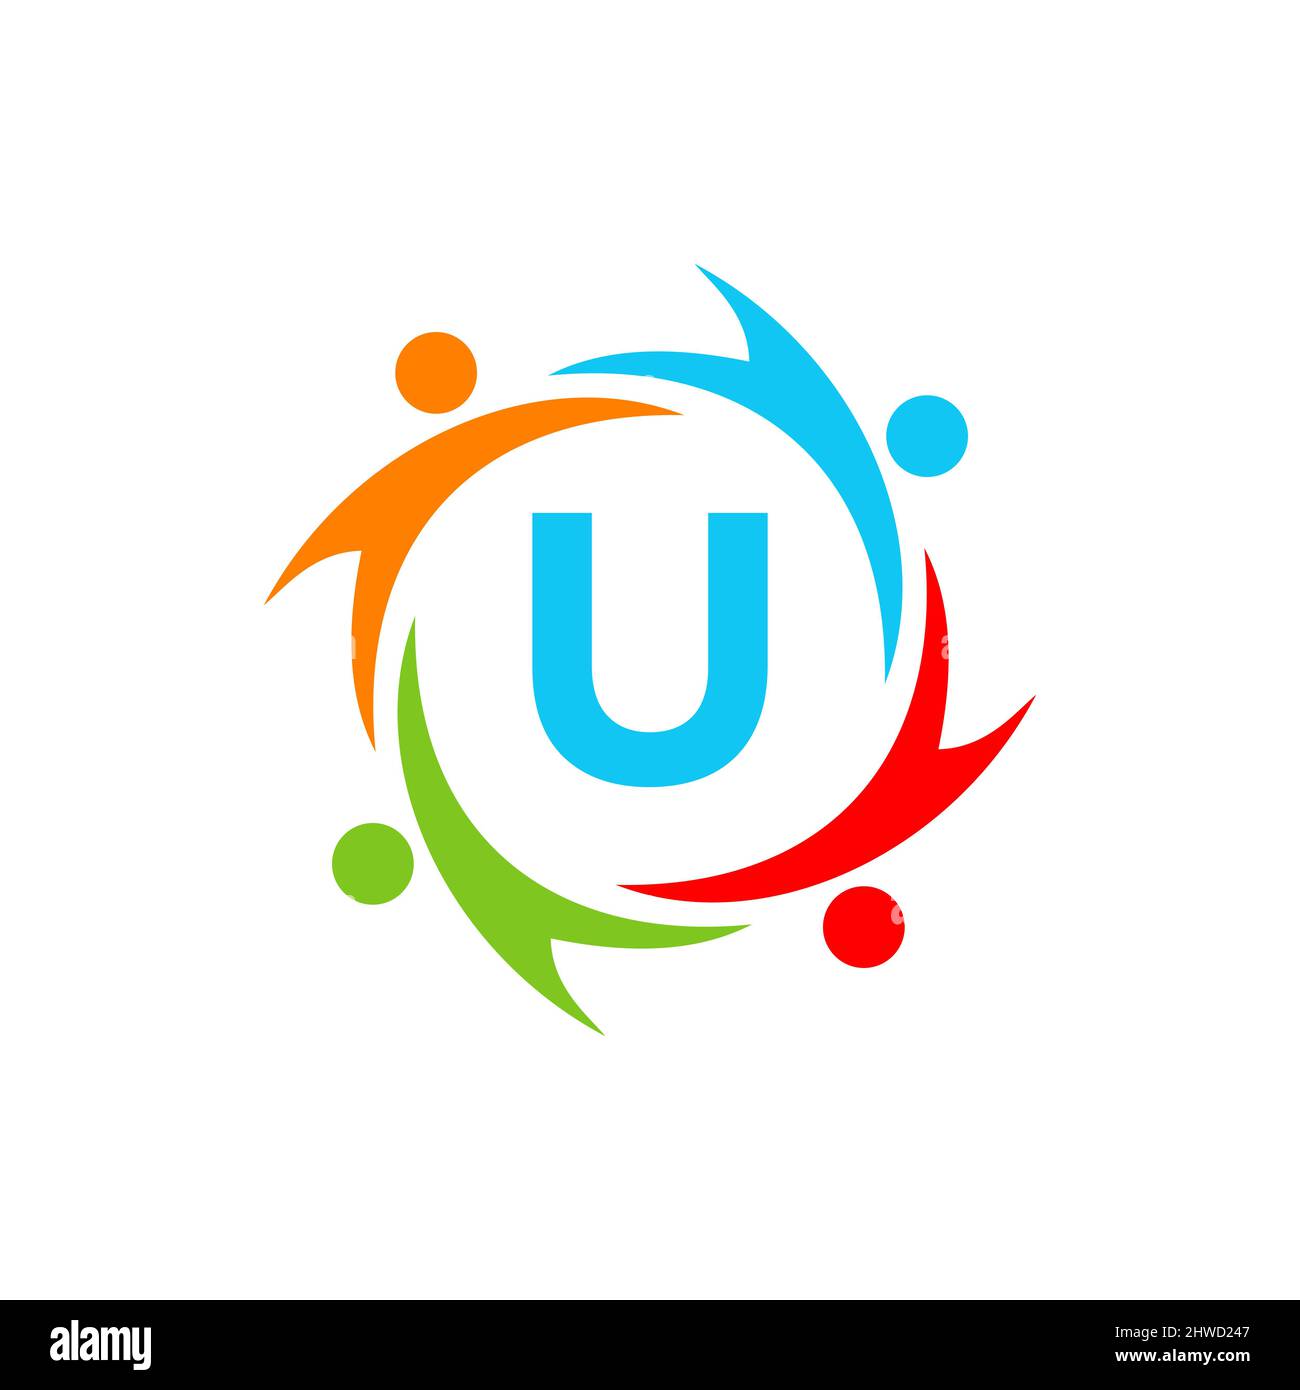 Charity Logo Template On Letter U, Initial Unity Foundation Human Logo Sign. Unity Team Work Logo Design With U Letter Template Stock Vector